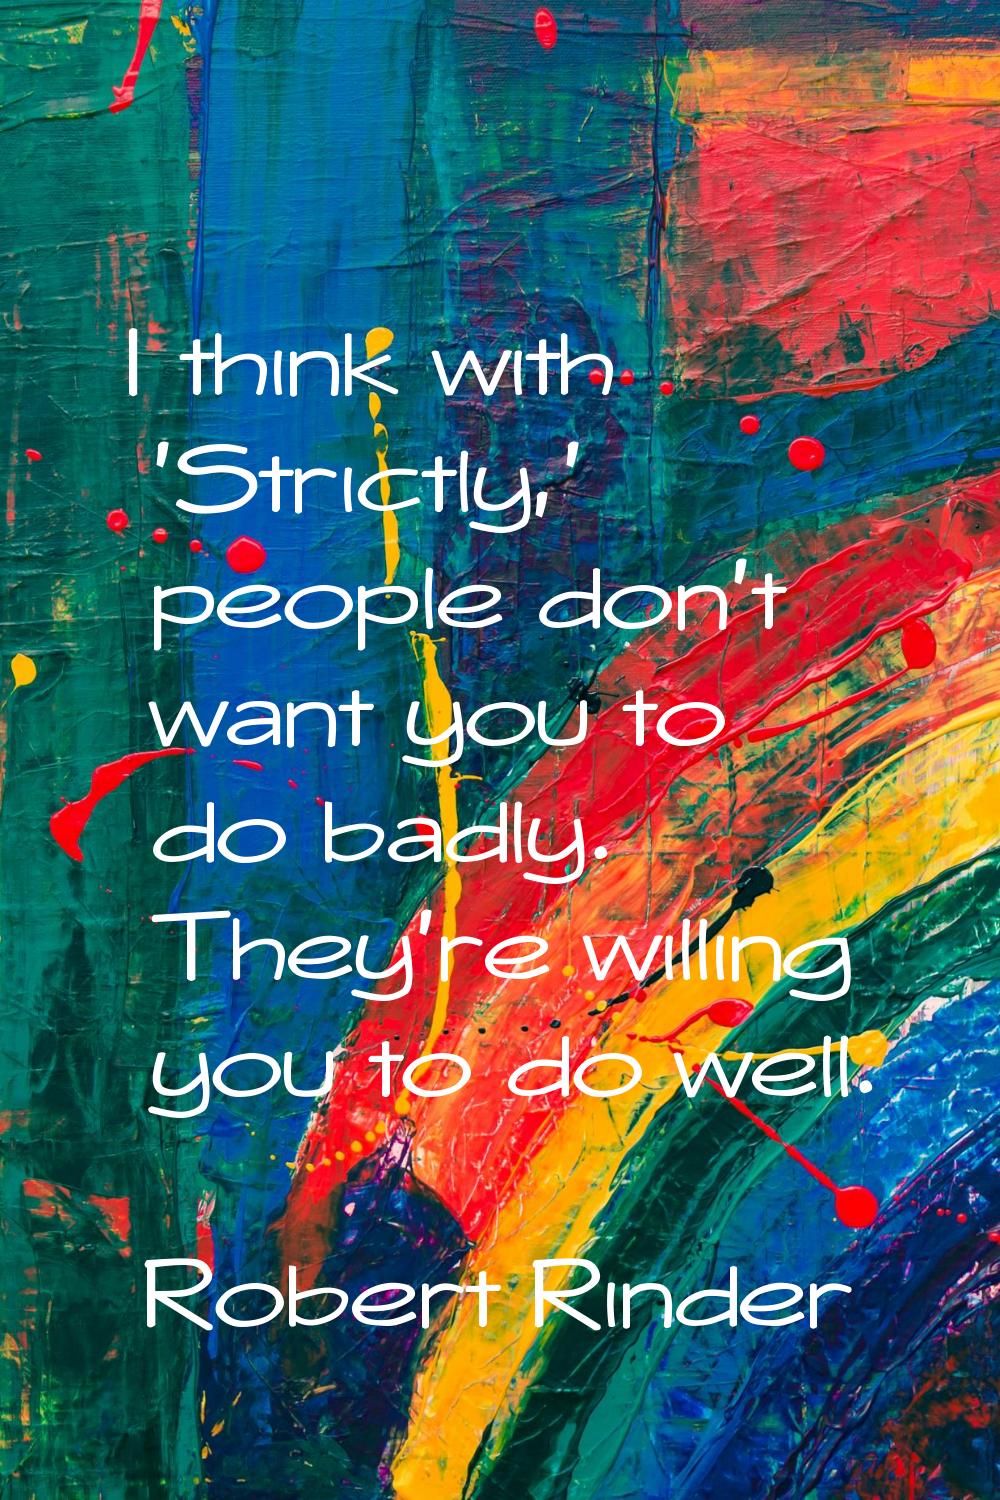 I think with 'Strictly,' people don't want you to do badly. They're willing you to do well.